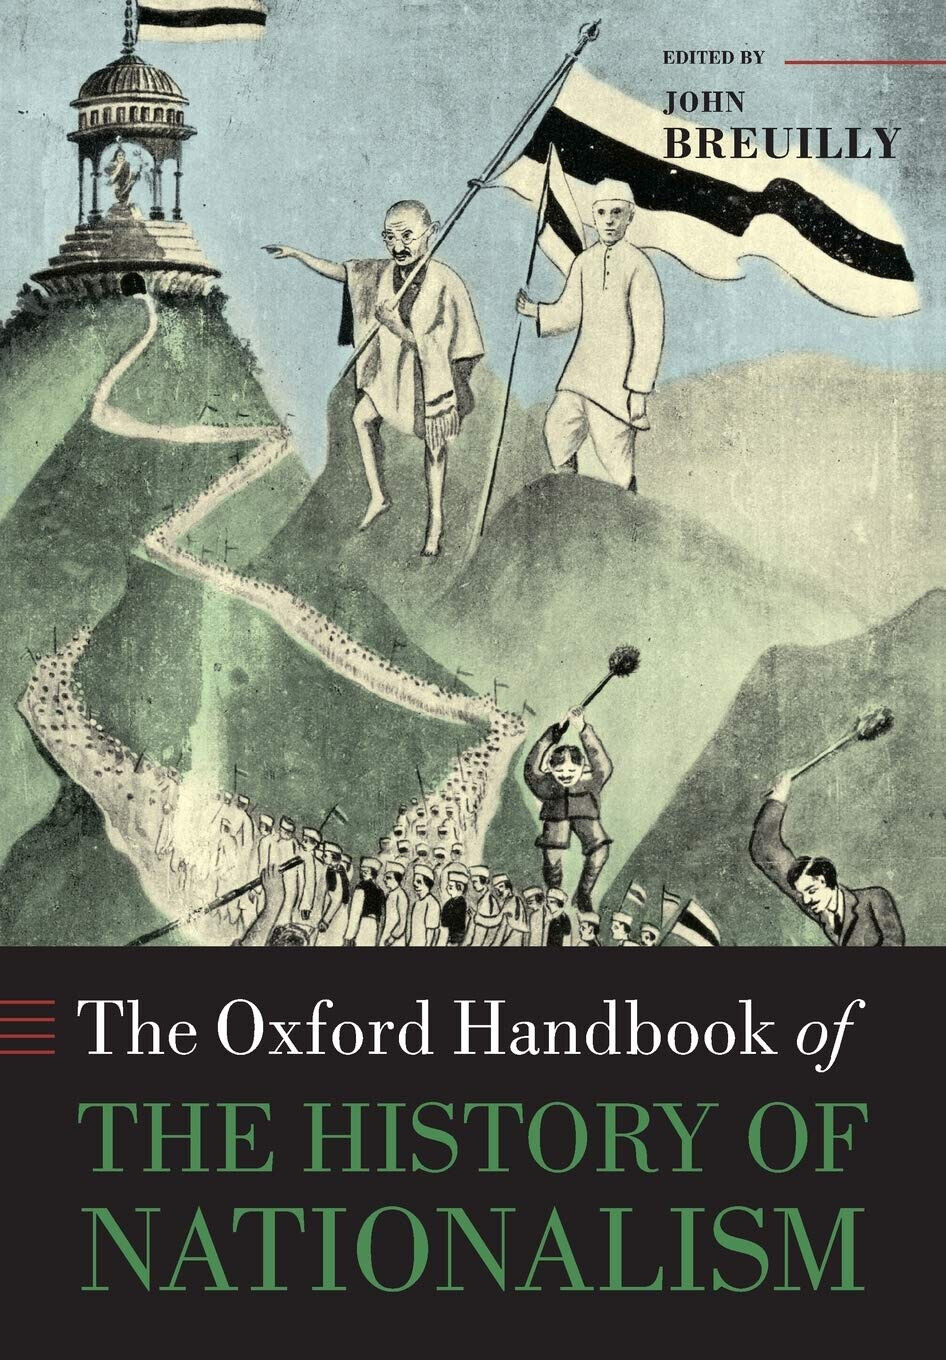 The Oxford Handbook of the History of Nationalism - John Breuilly - 2016 libro usato